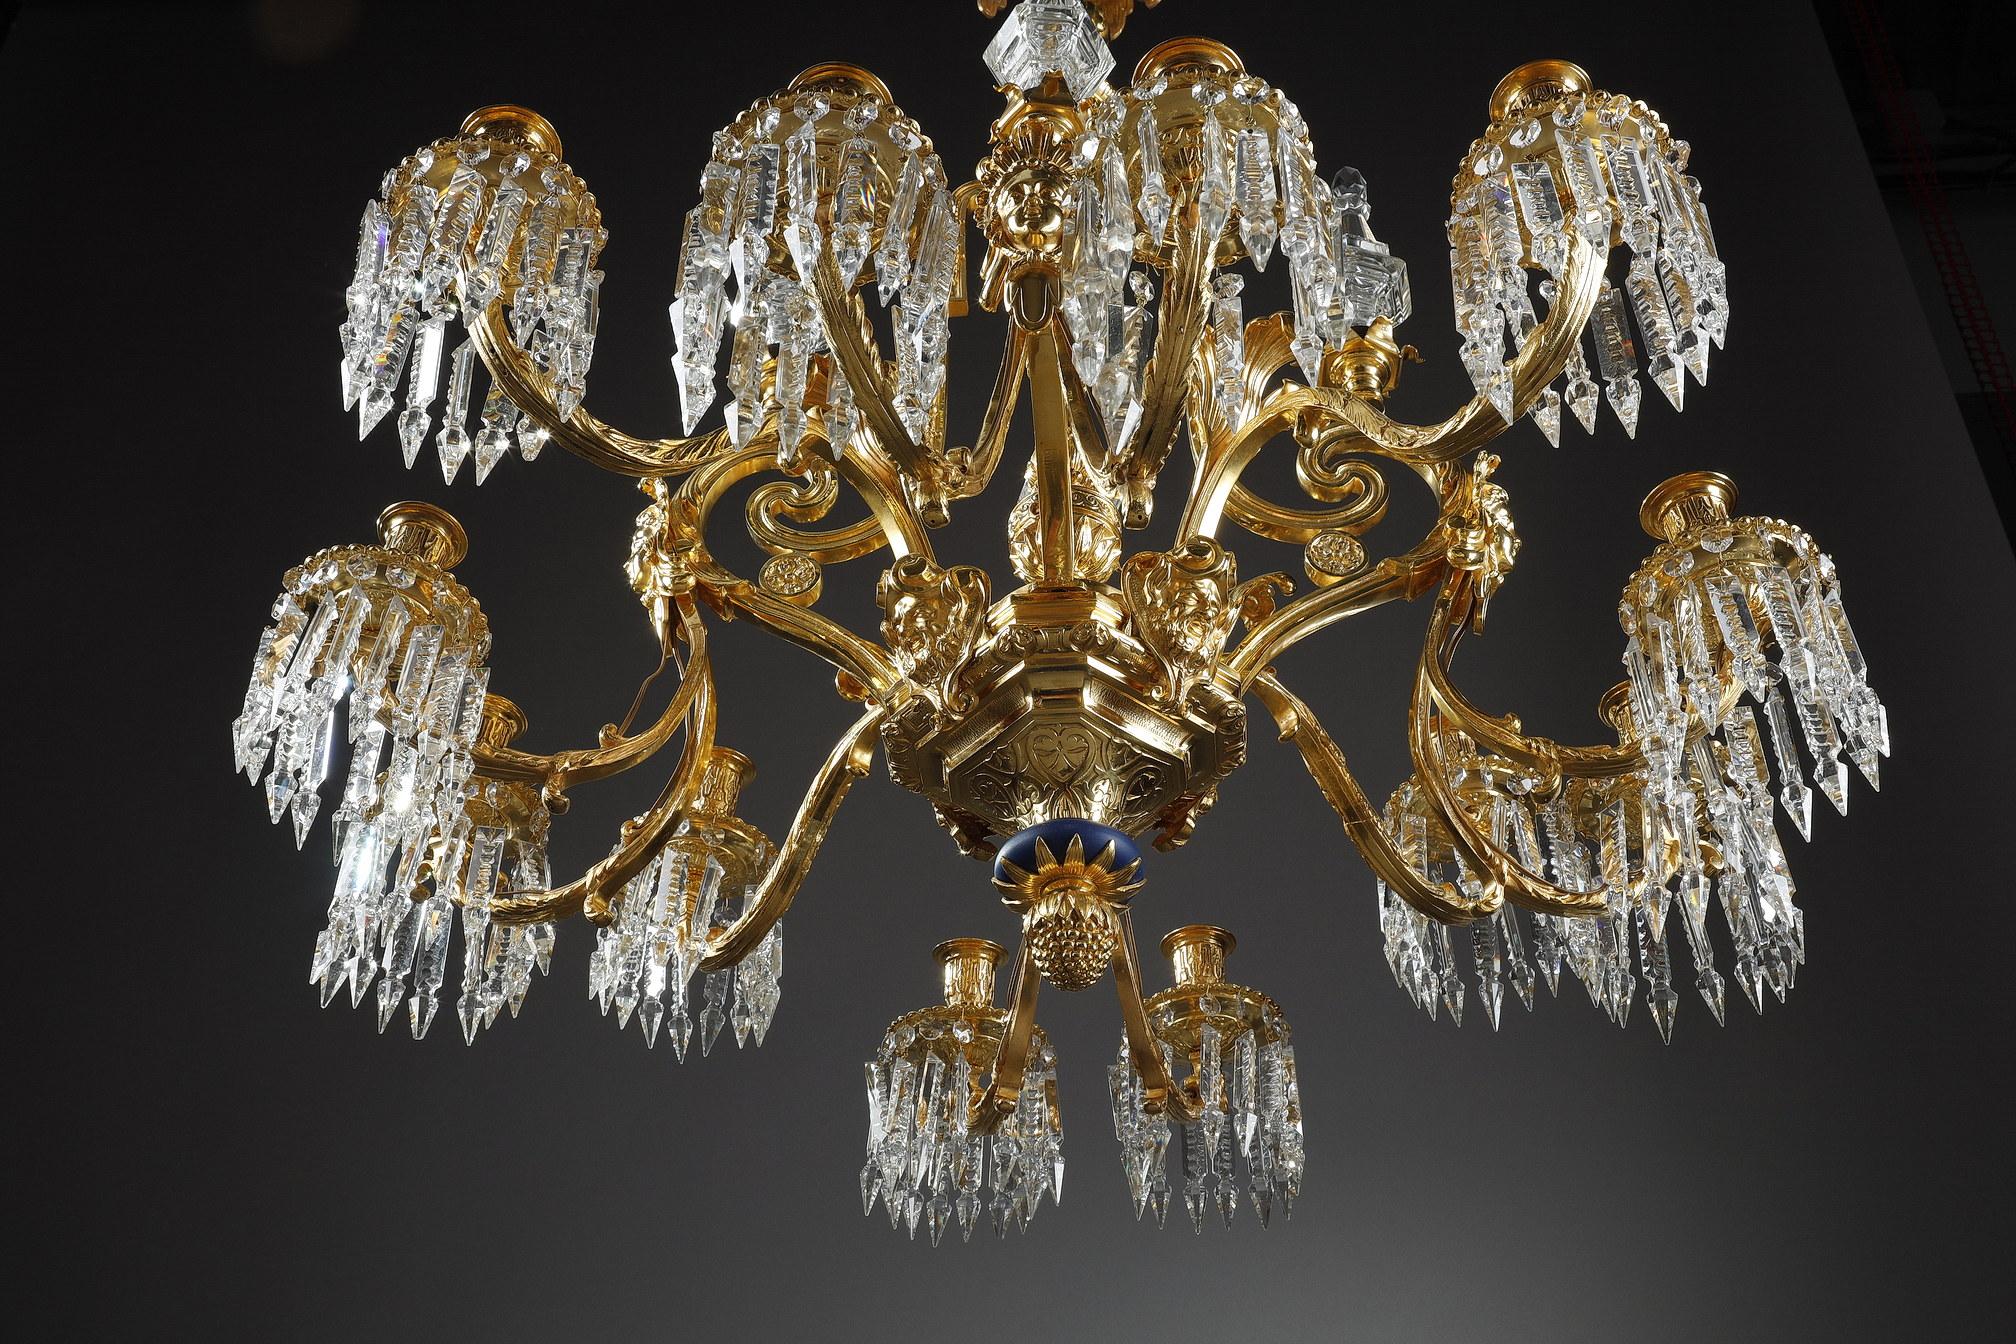 Large Chandelier with Gilt Bronze Crystals and Masks Decorations For Sale 1